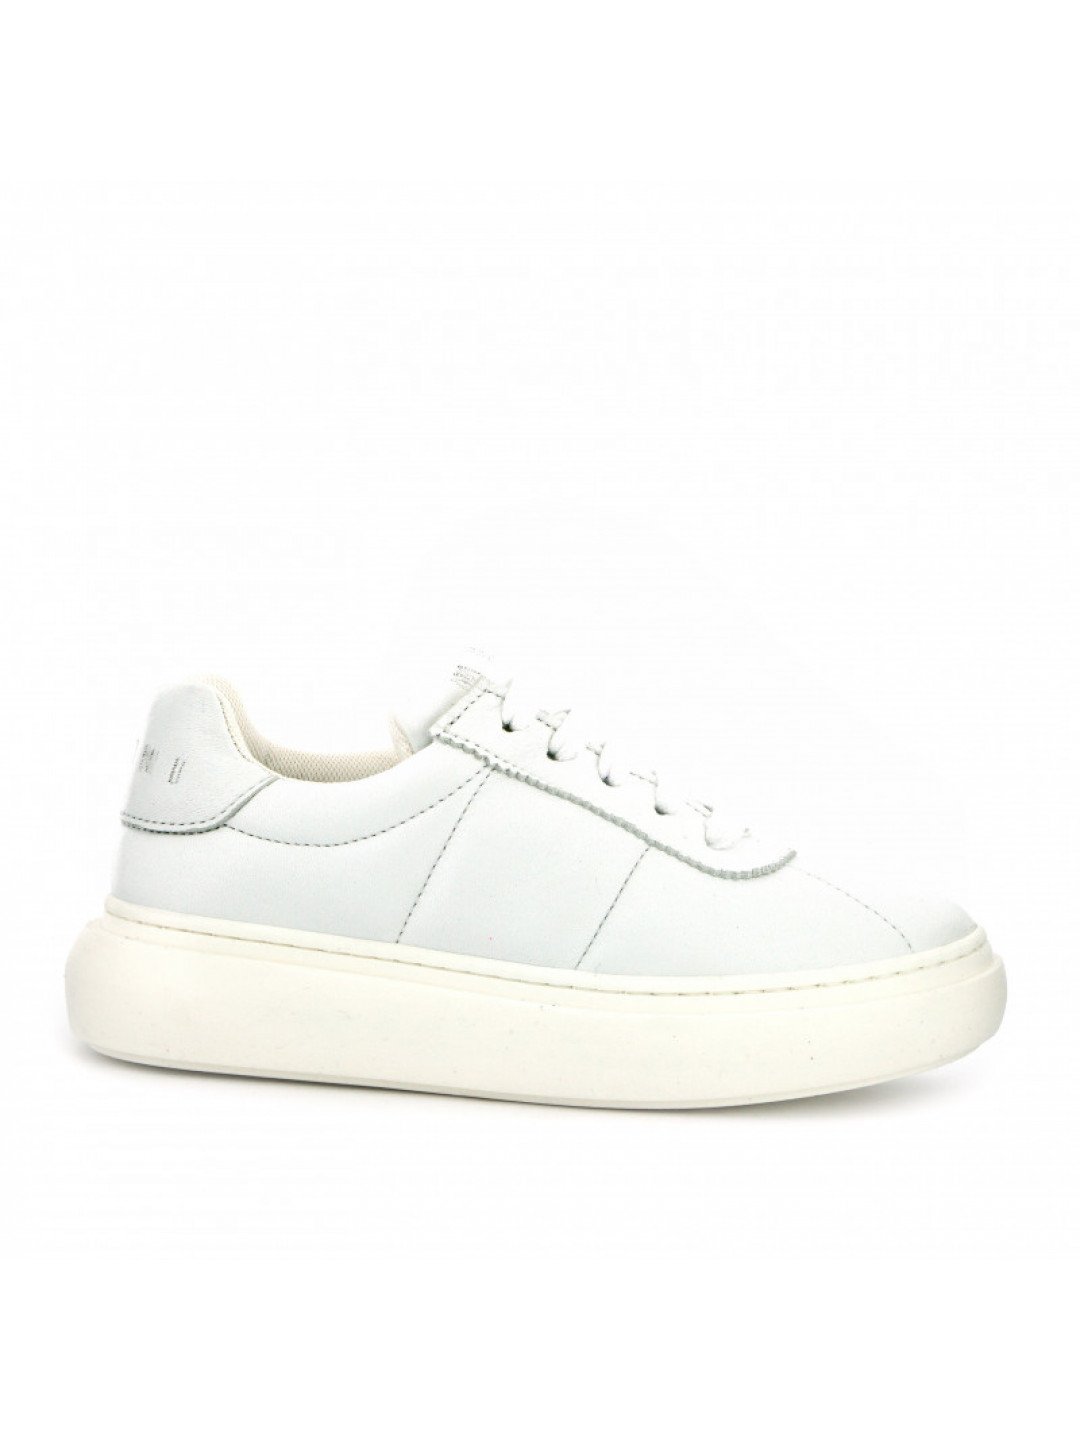 Tenisky marni tone on tone embroidered logo soft padded nappa lace-up low sneakers bílá 40